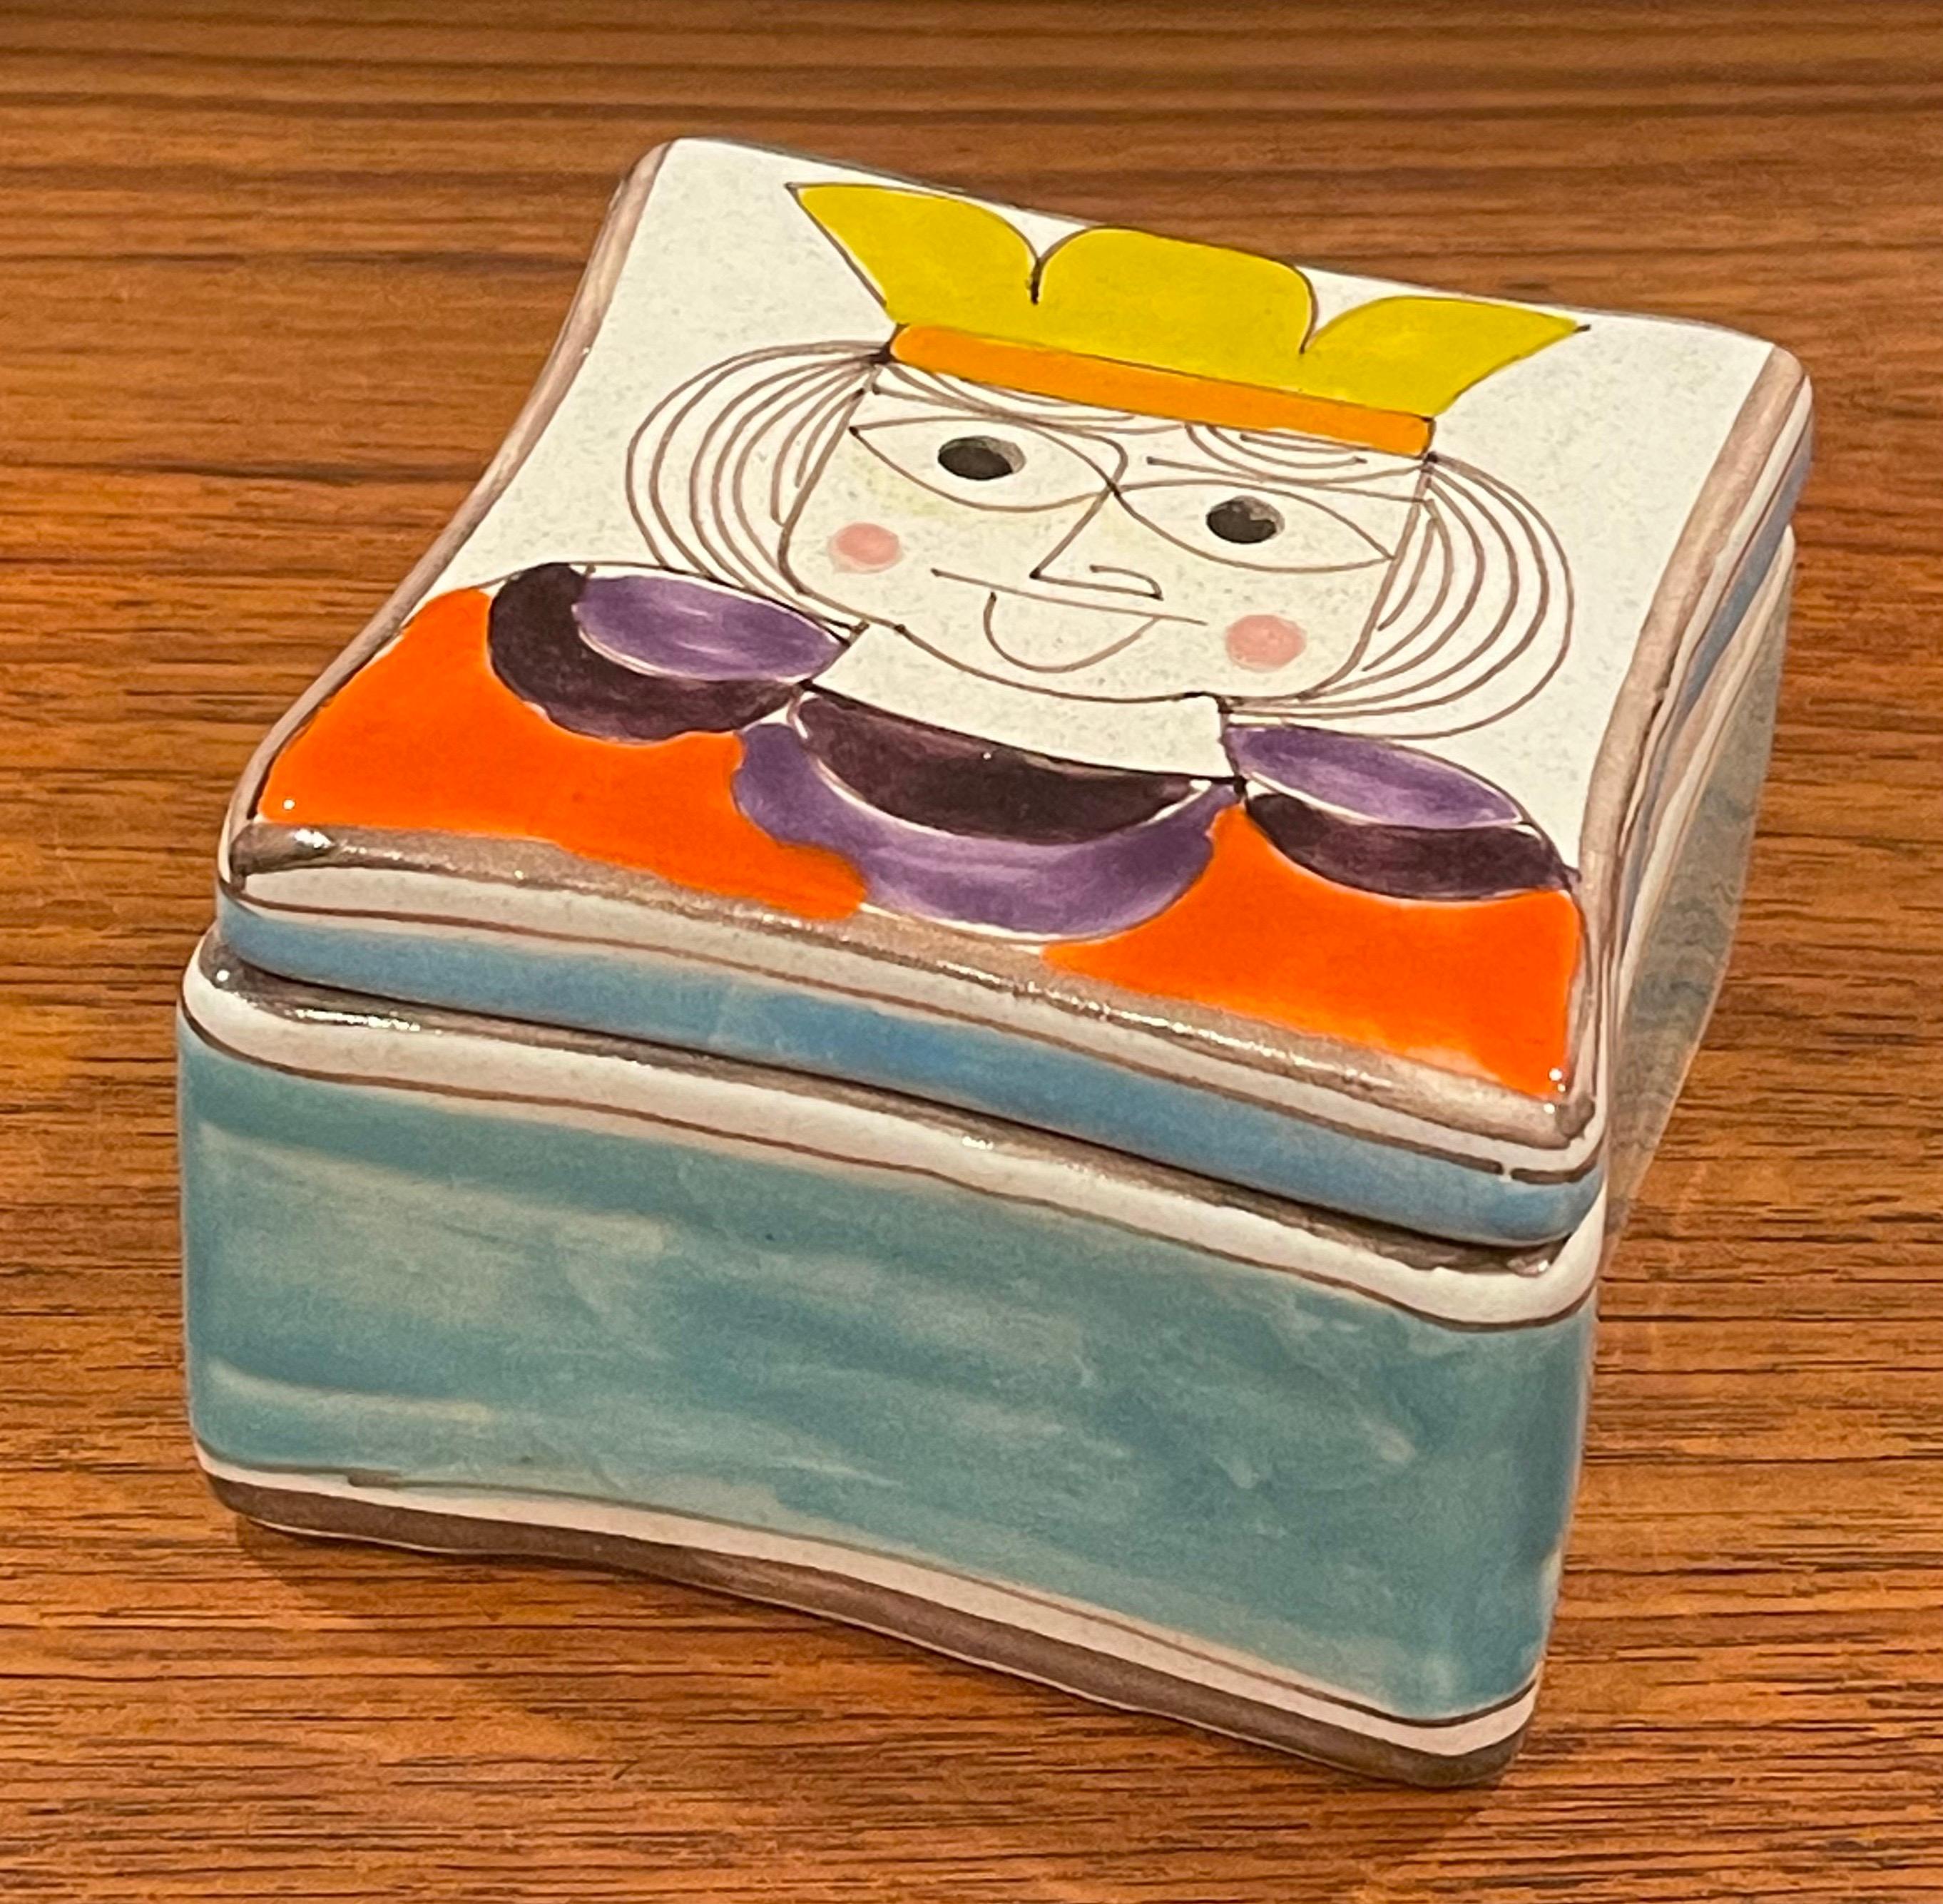 A wonderful and colorful Giovanni Desimone hand painted lidded trinket box, circa 1970s. The handcrafted ceramic box was made in Italy and measures 4.4